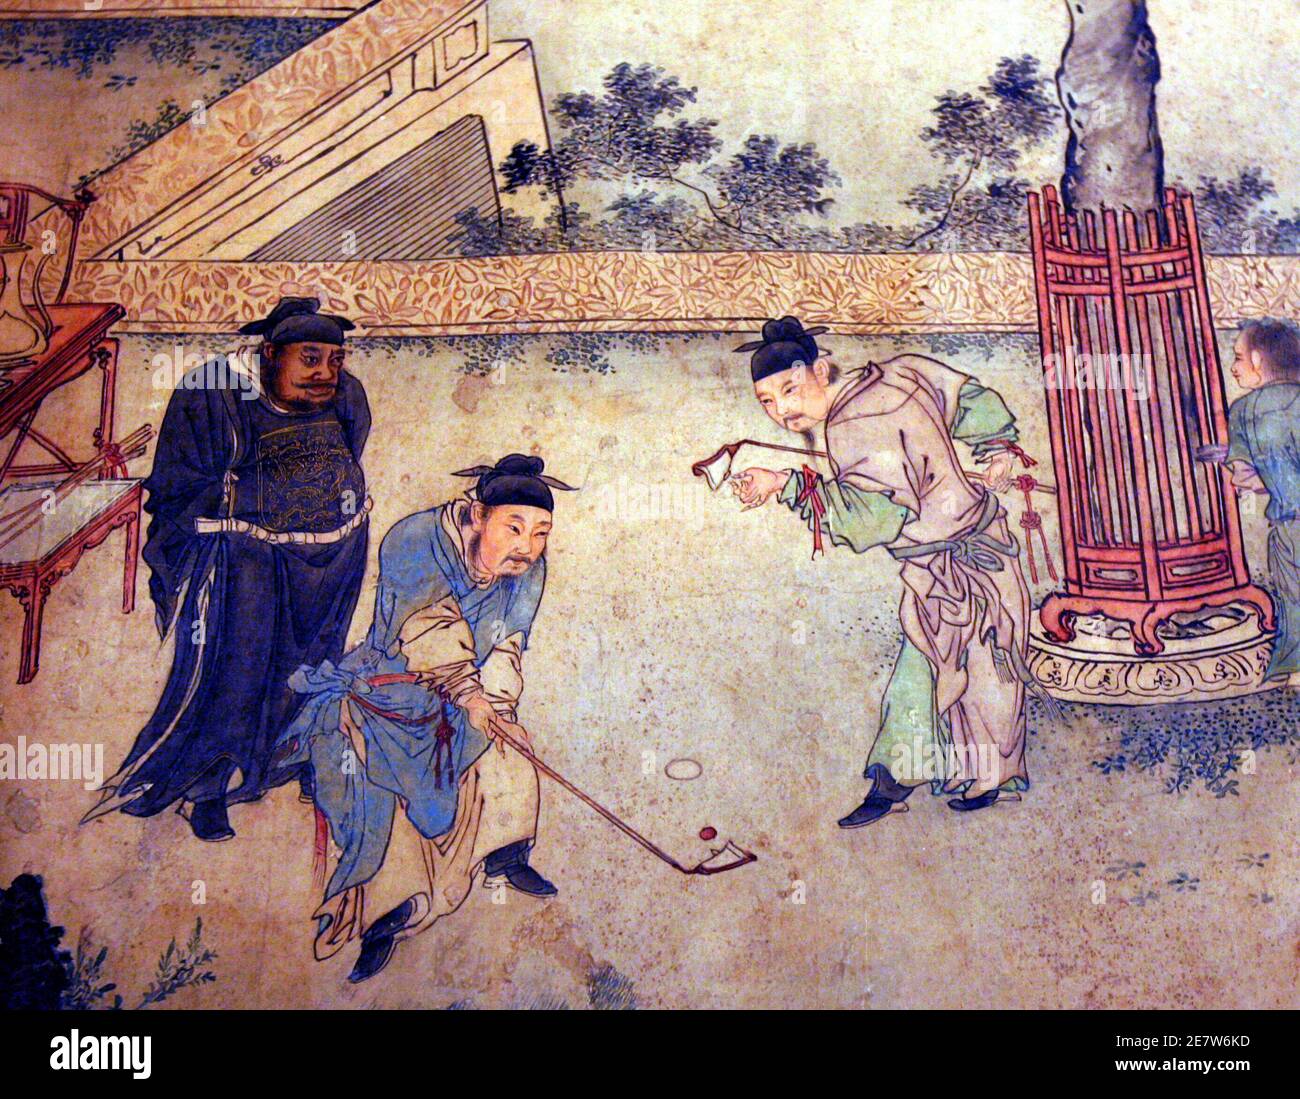 Part of a Ming dynasty scroll "The Autumn Banquet", being exhibited at the  Hong Kong Heritage Museum March 21, 2006, shows participants of an imperial  court spend their pastime on 'chuiwan' similar